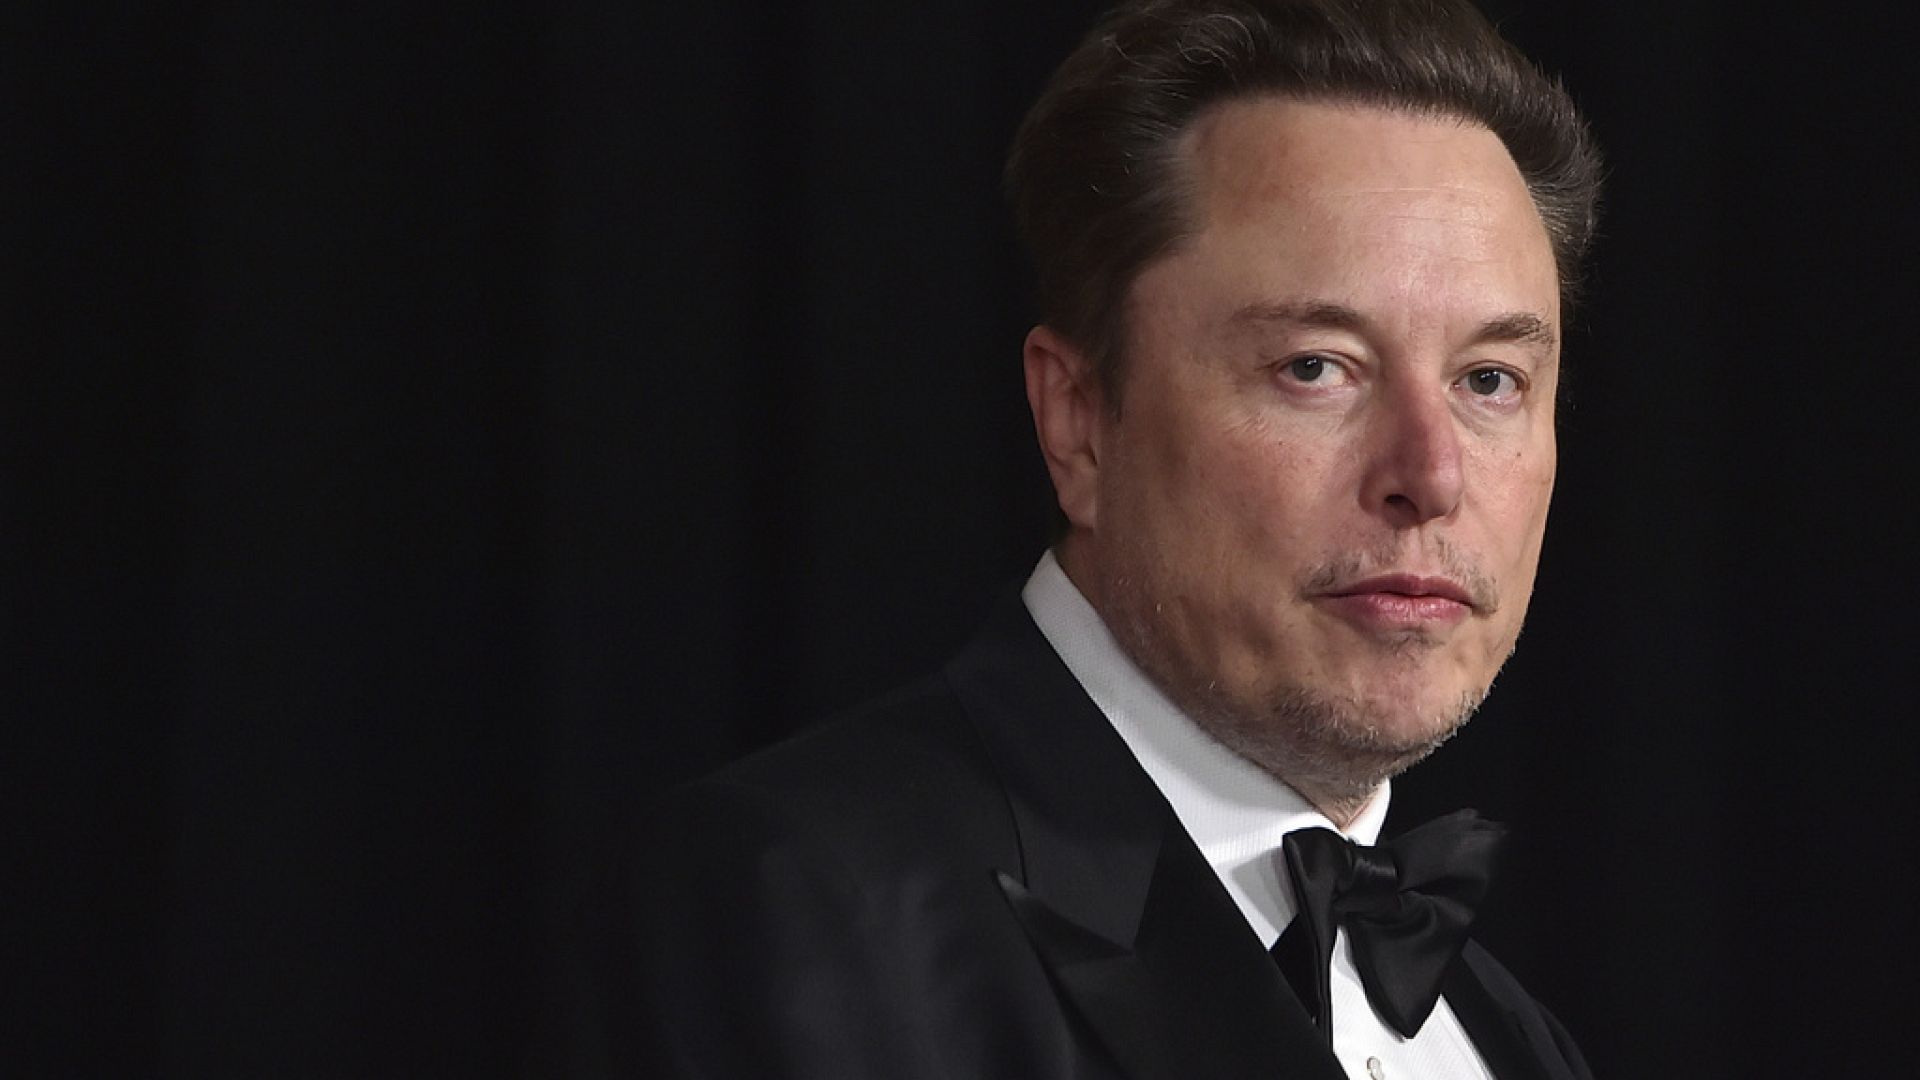 FINALLY: THE END OF X? Elon Musk allegedly wants to charge users for posting on his website 🚨